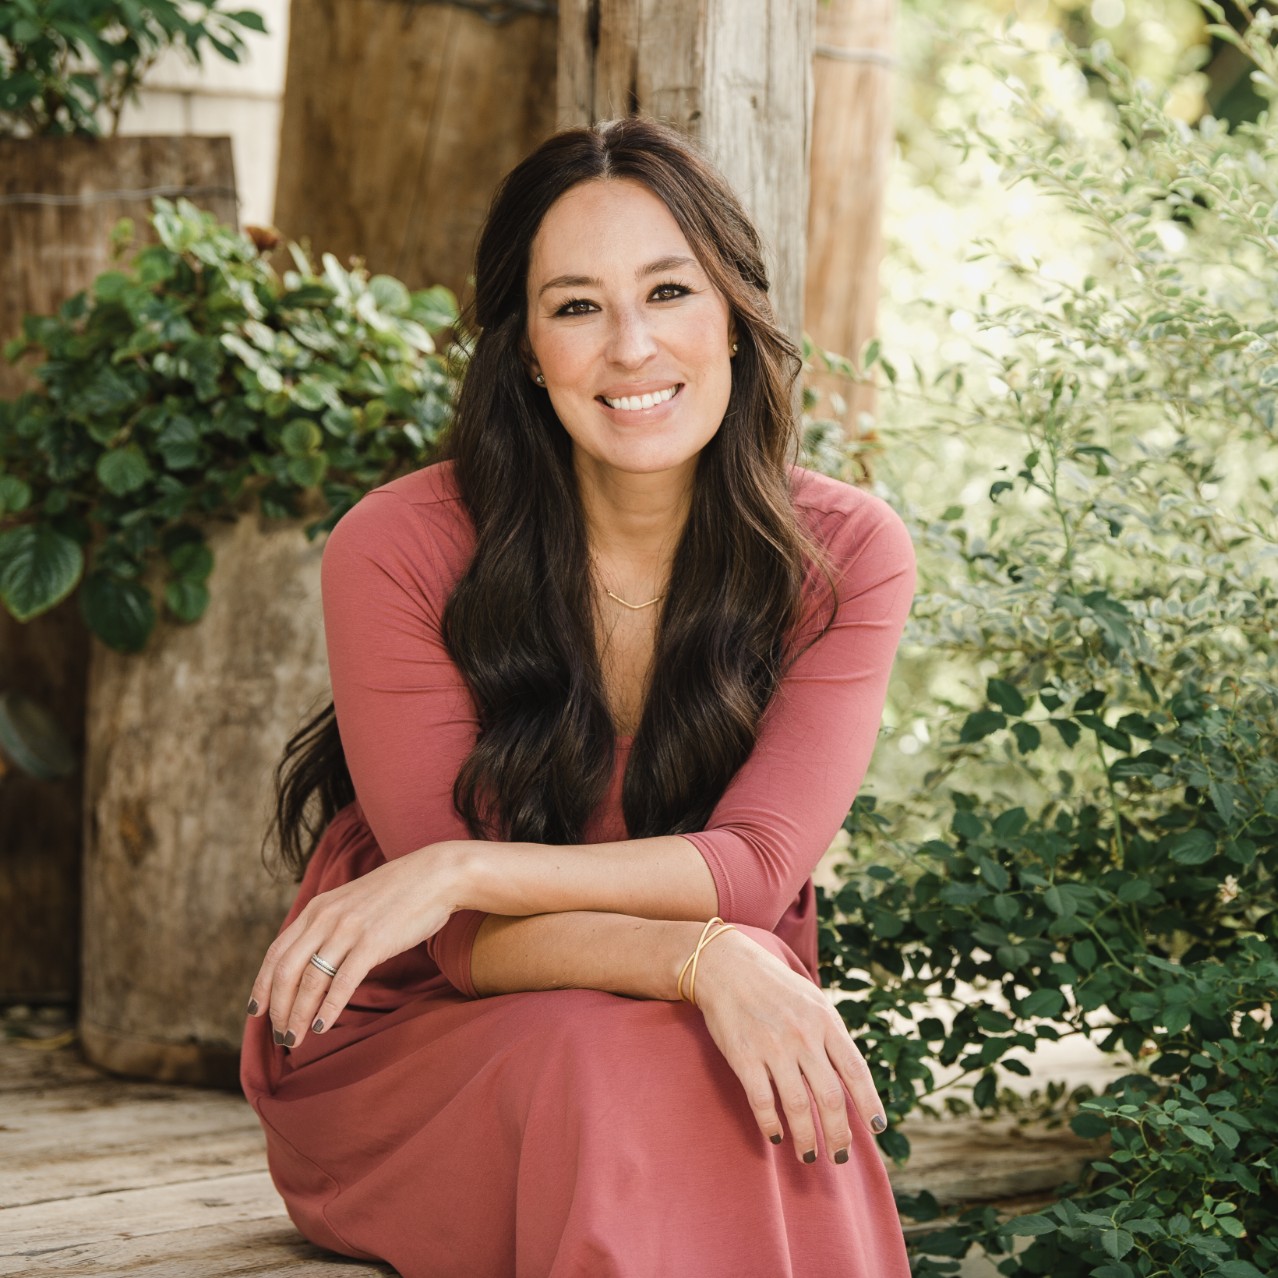 Joanna Gaines Floret sitting on a porch smiling